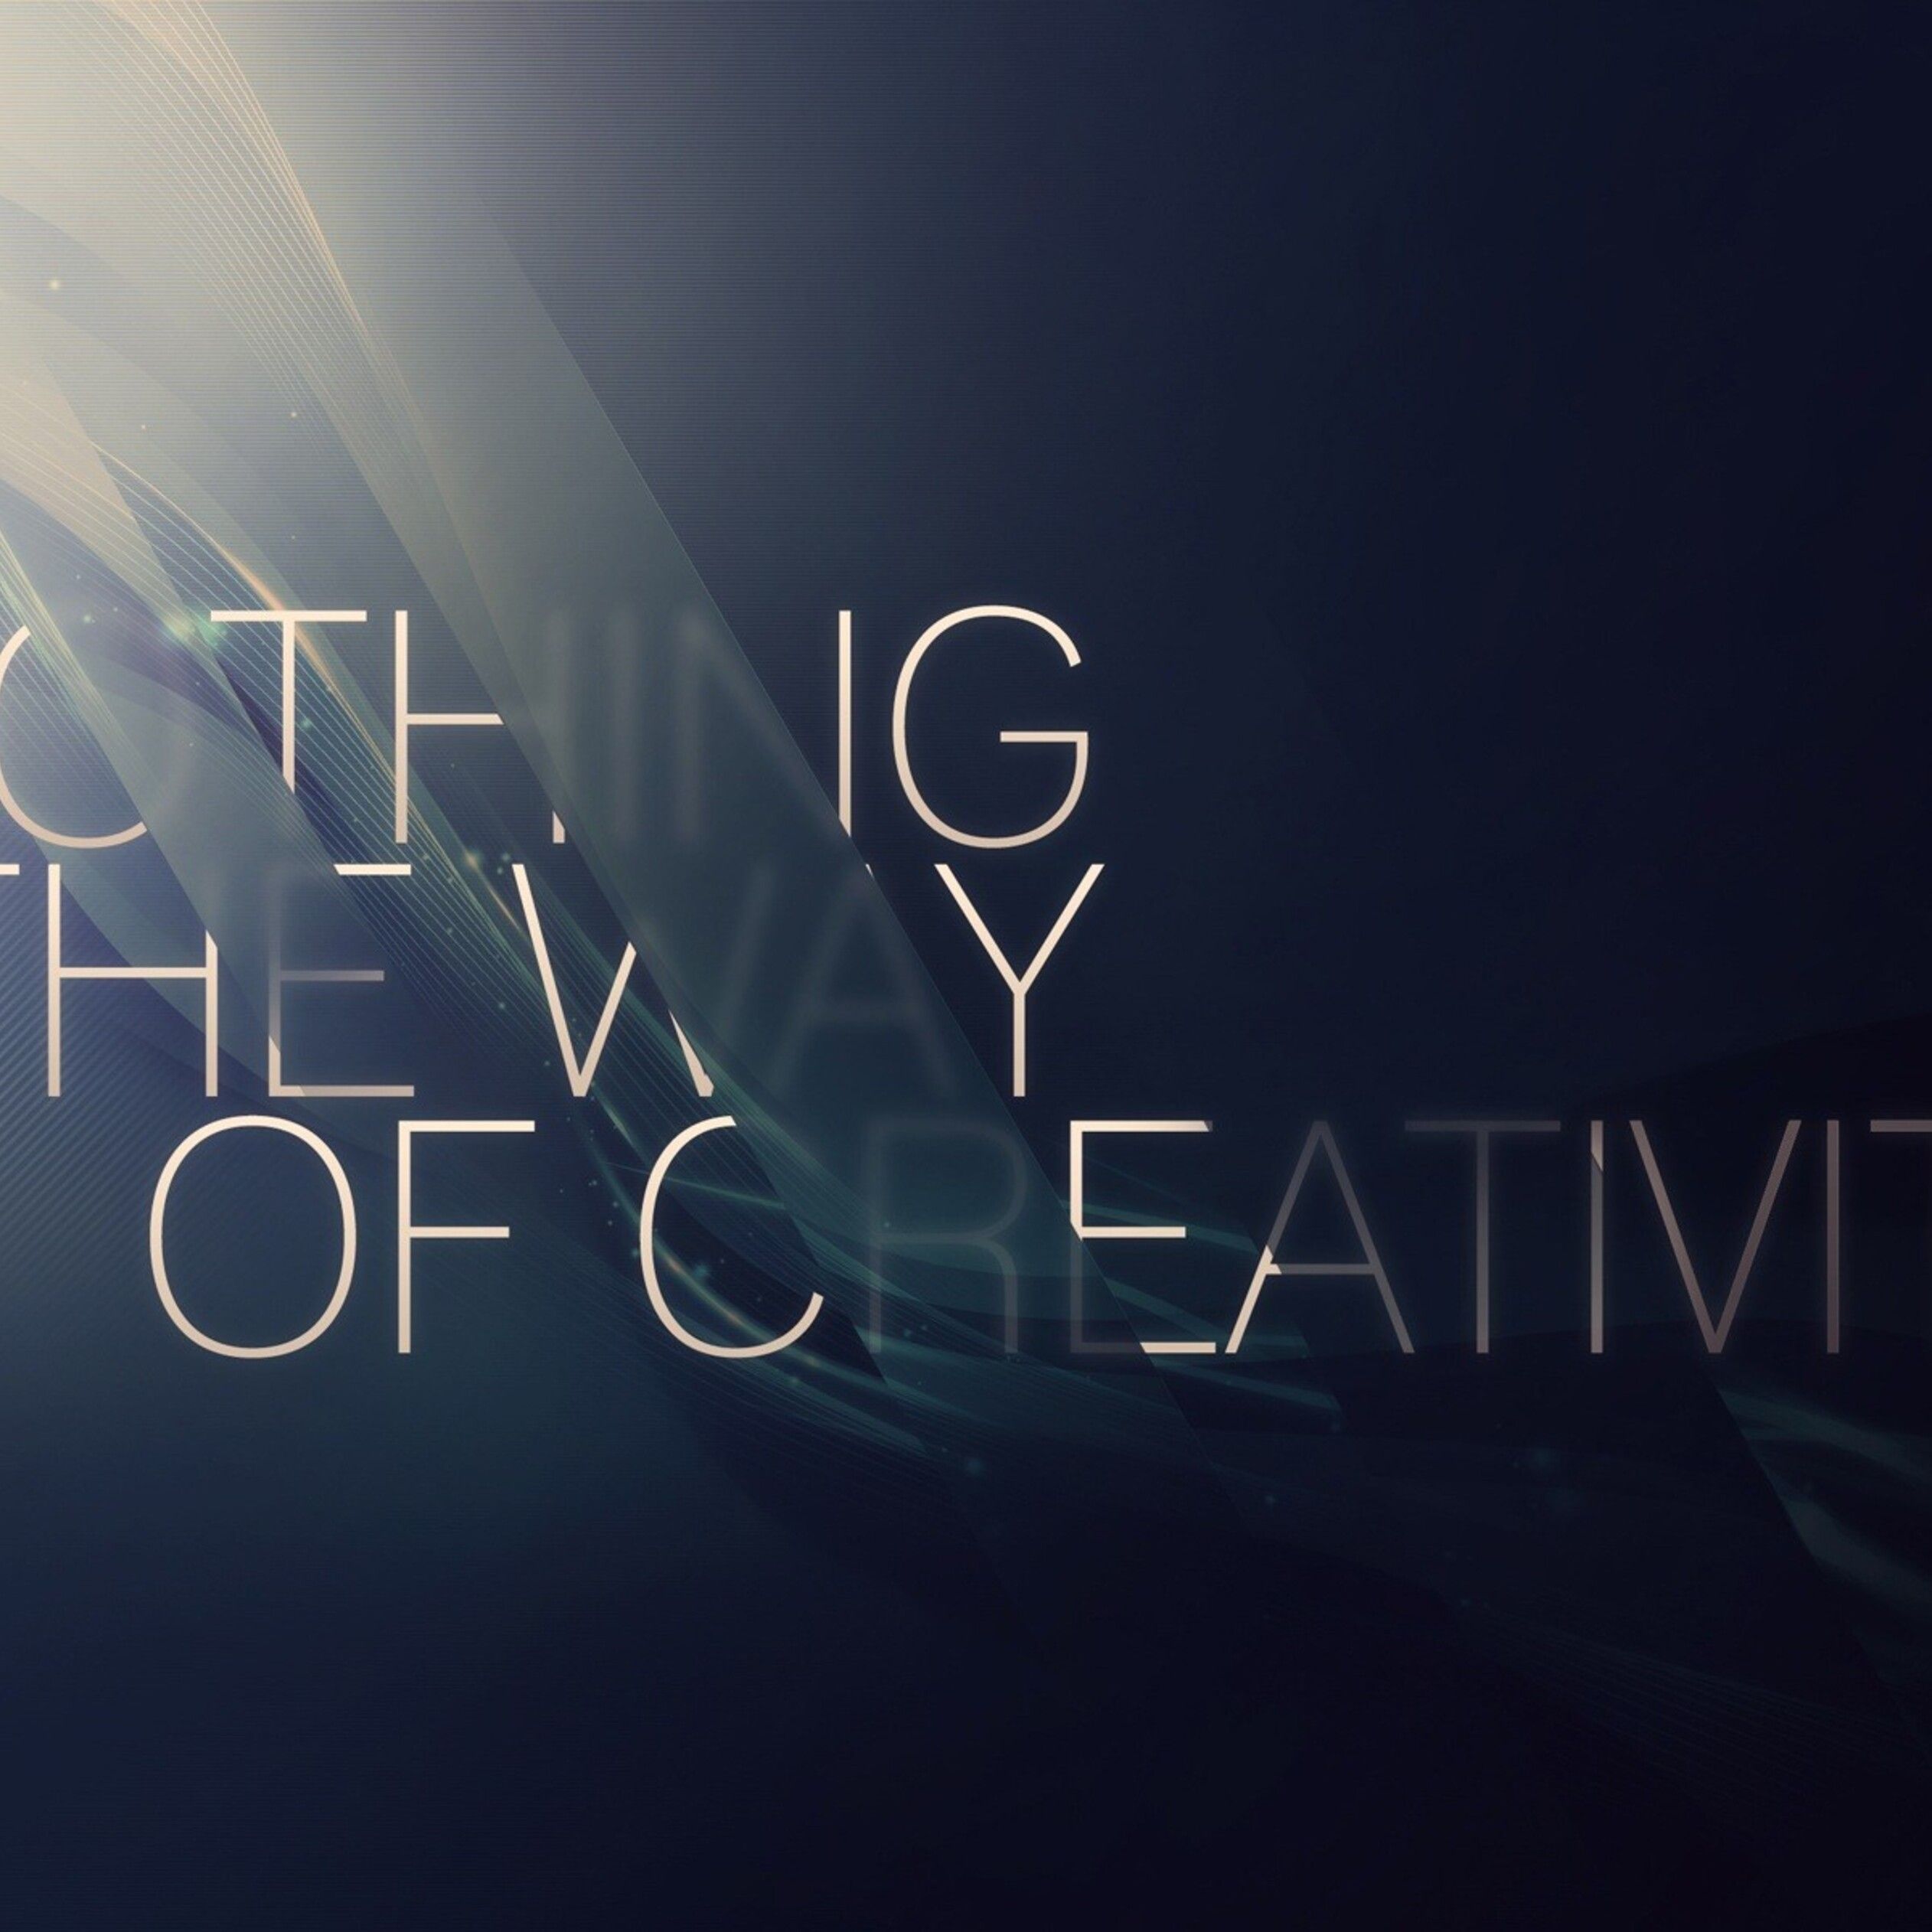 Nothing in the way of creativity